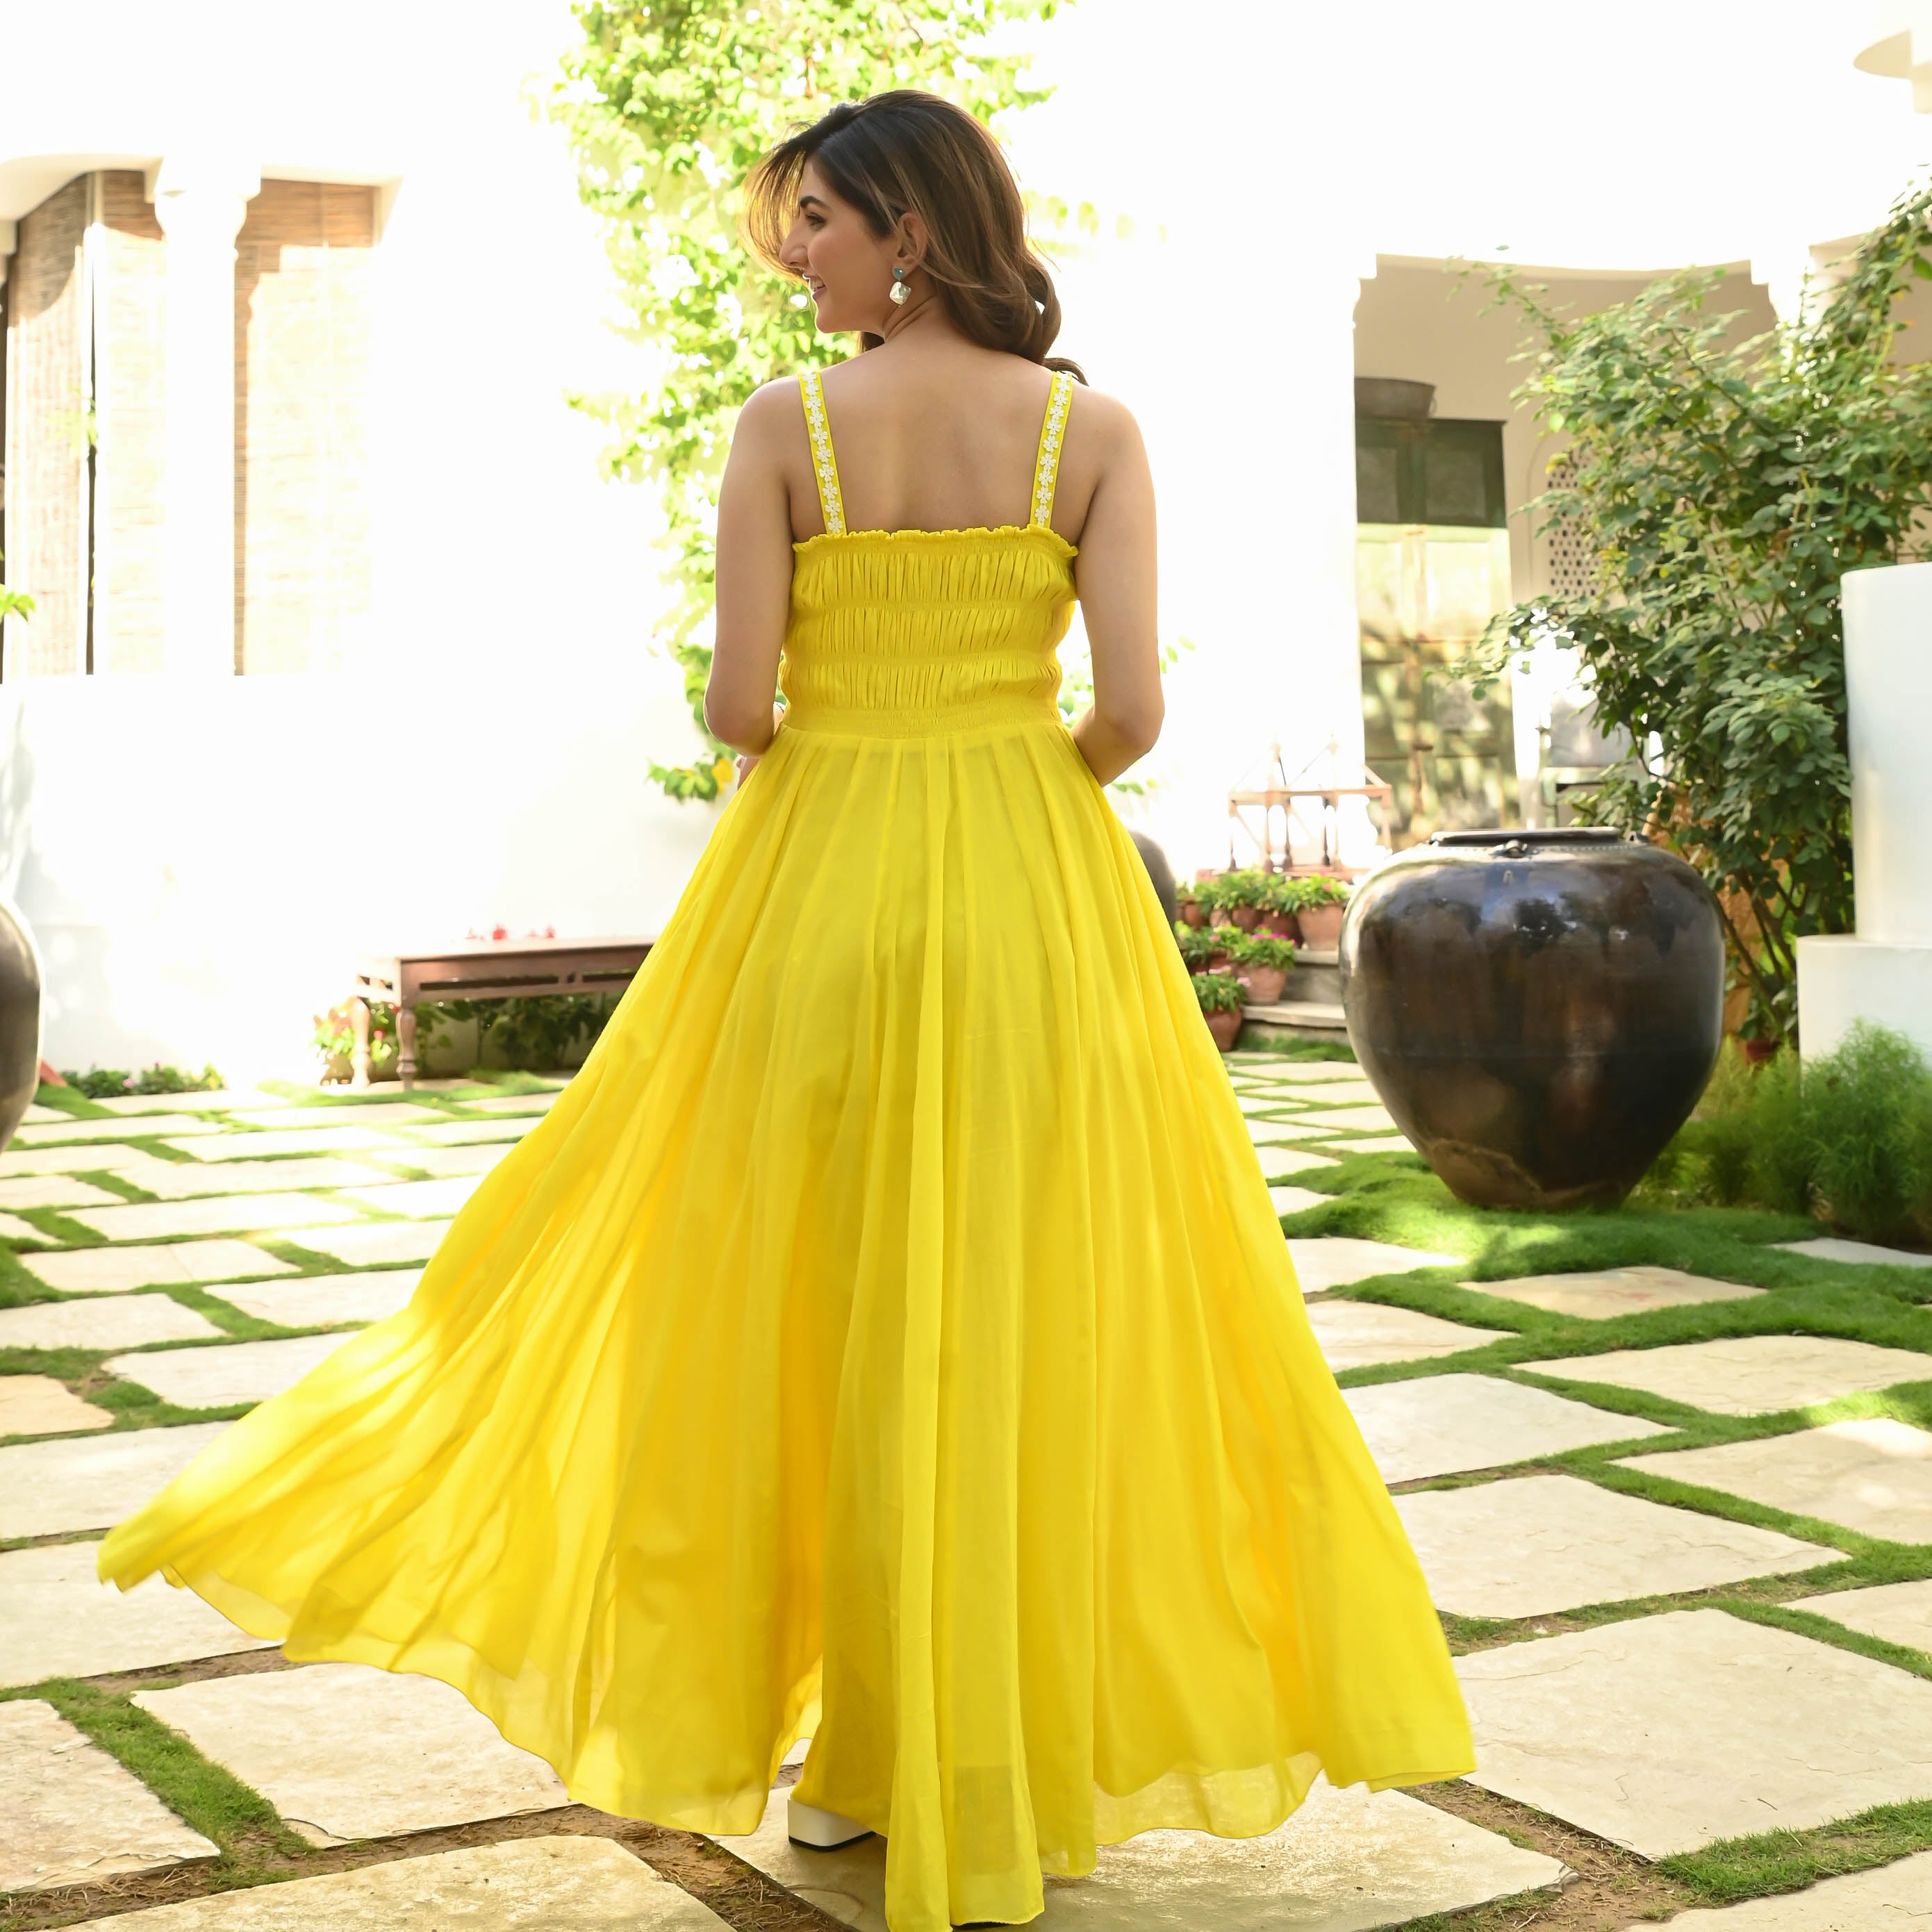 Buy Indian Latest Yellow Haldi Wear Gown Online at Ethnic Plus at Best Price